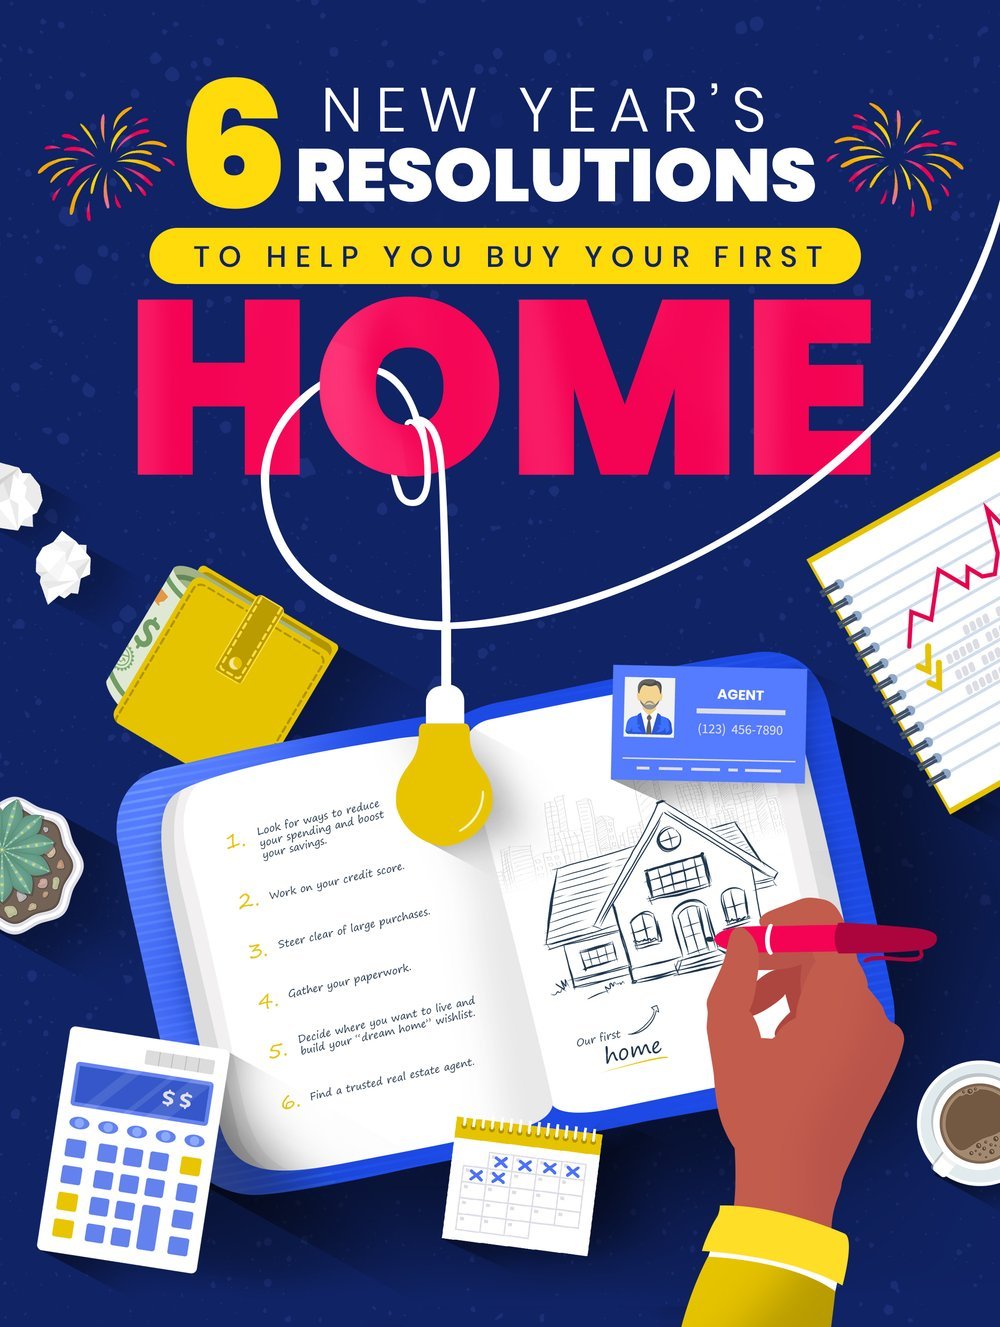 6 New Year's Resolutions To Help You Buy Your First Home